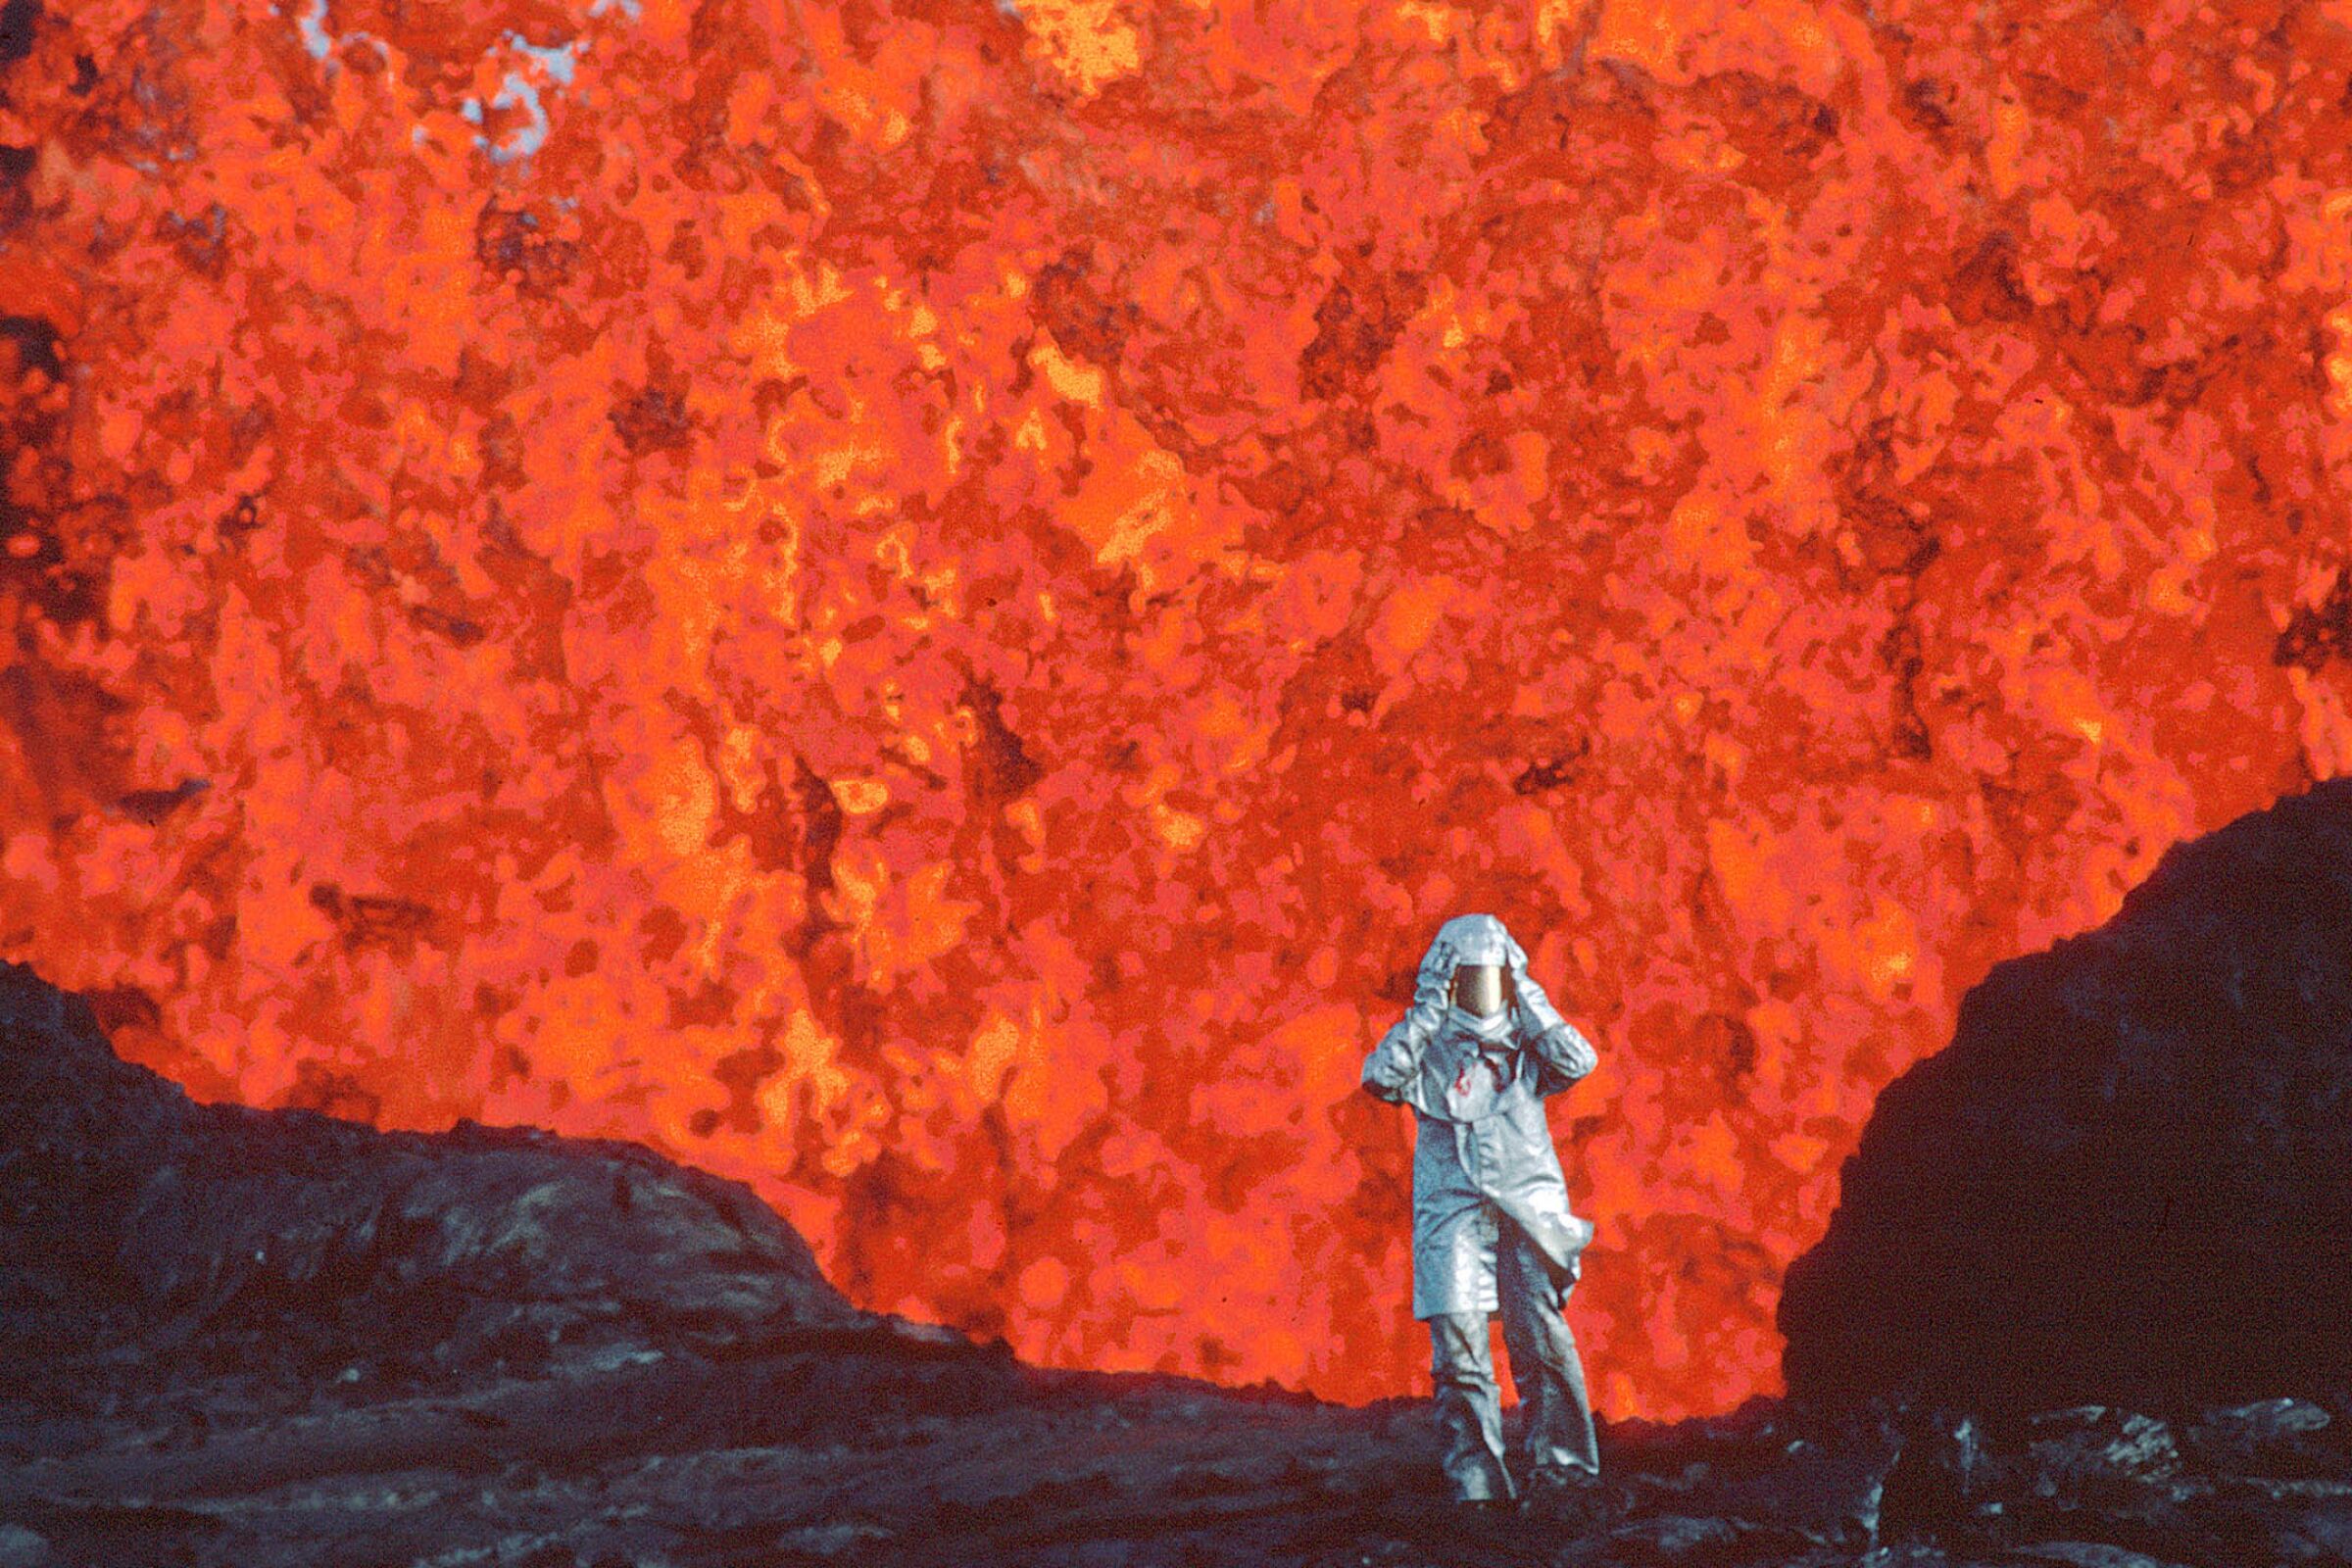 A figure in a silver fireproof suit and helmet stands on the edge of a volcano with lava raging behind.